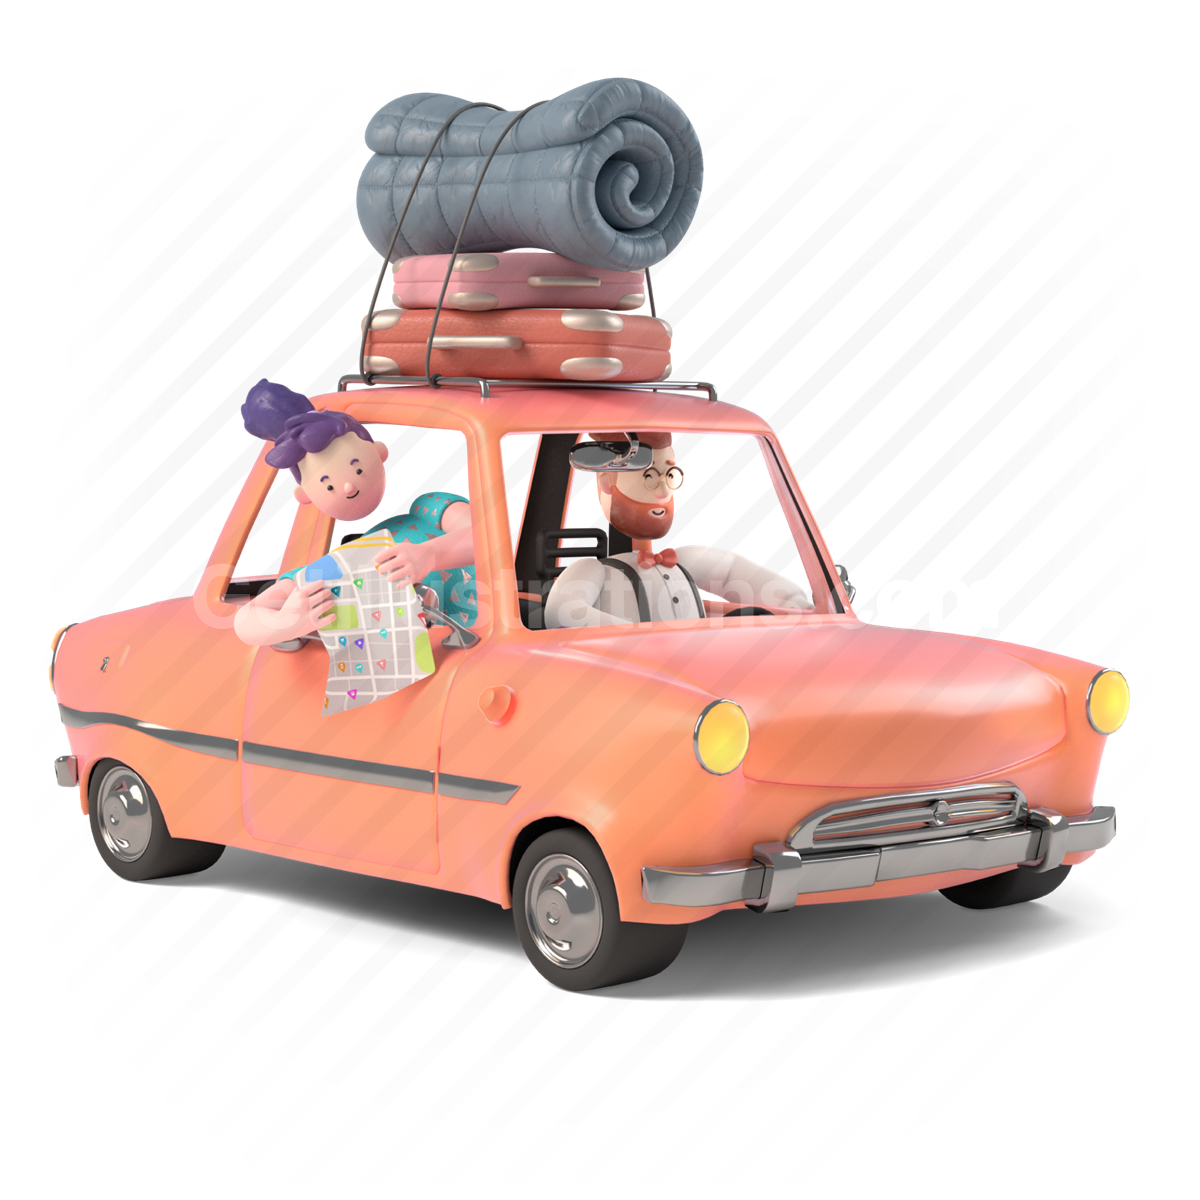 3d, people, person, character, car, vehicle, travel, map